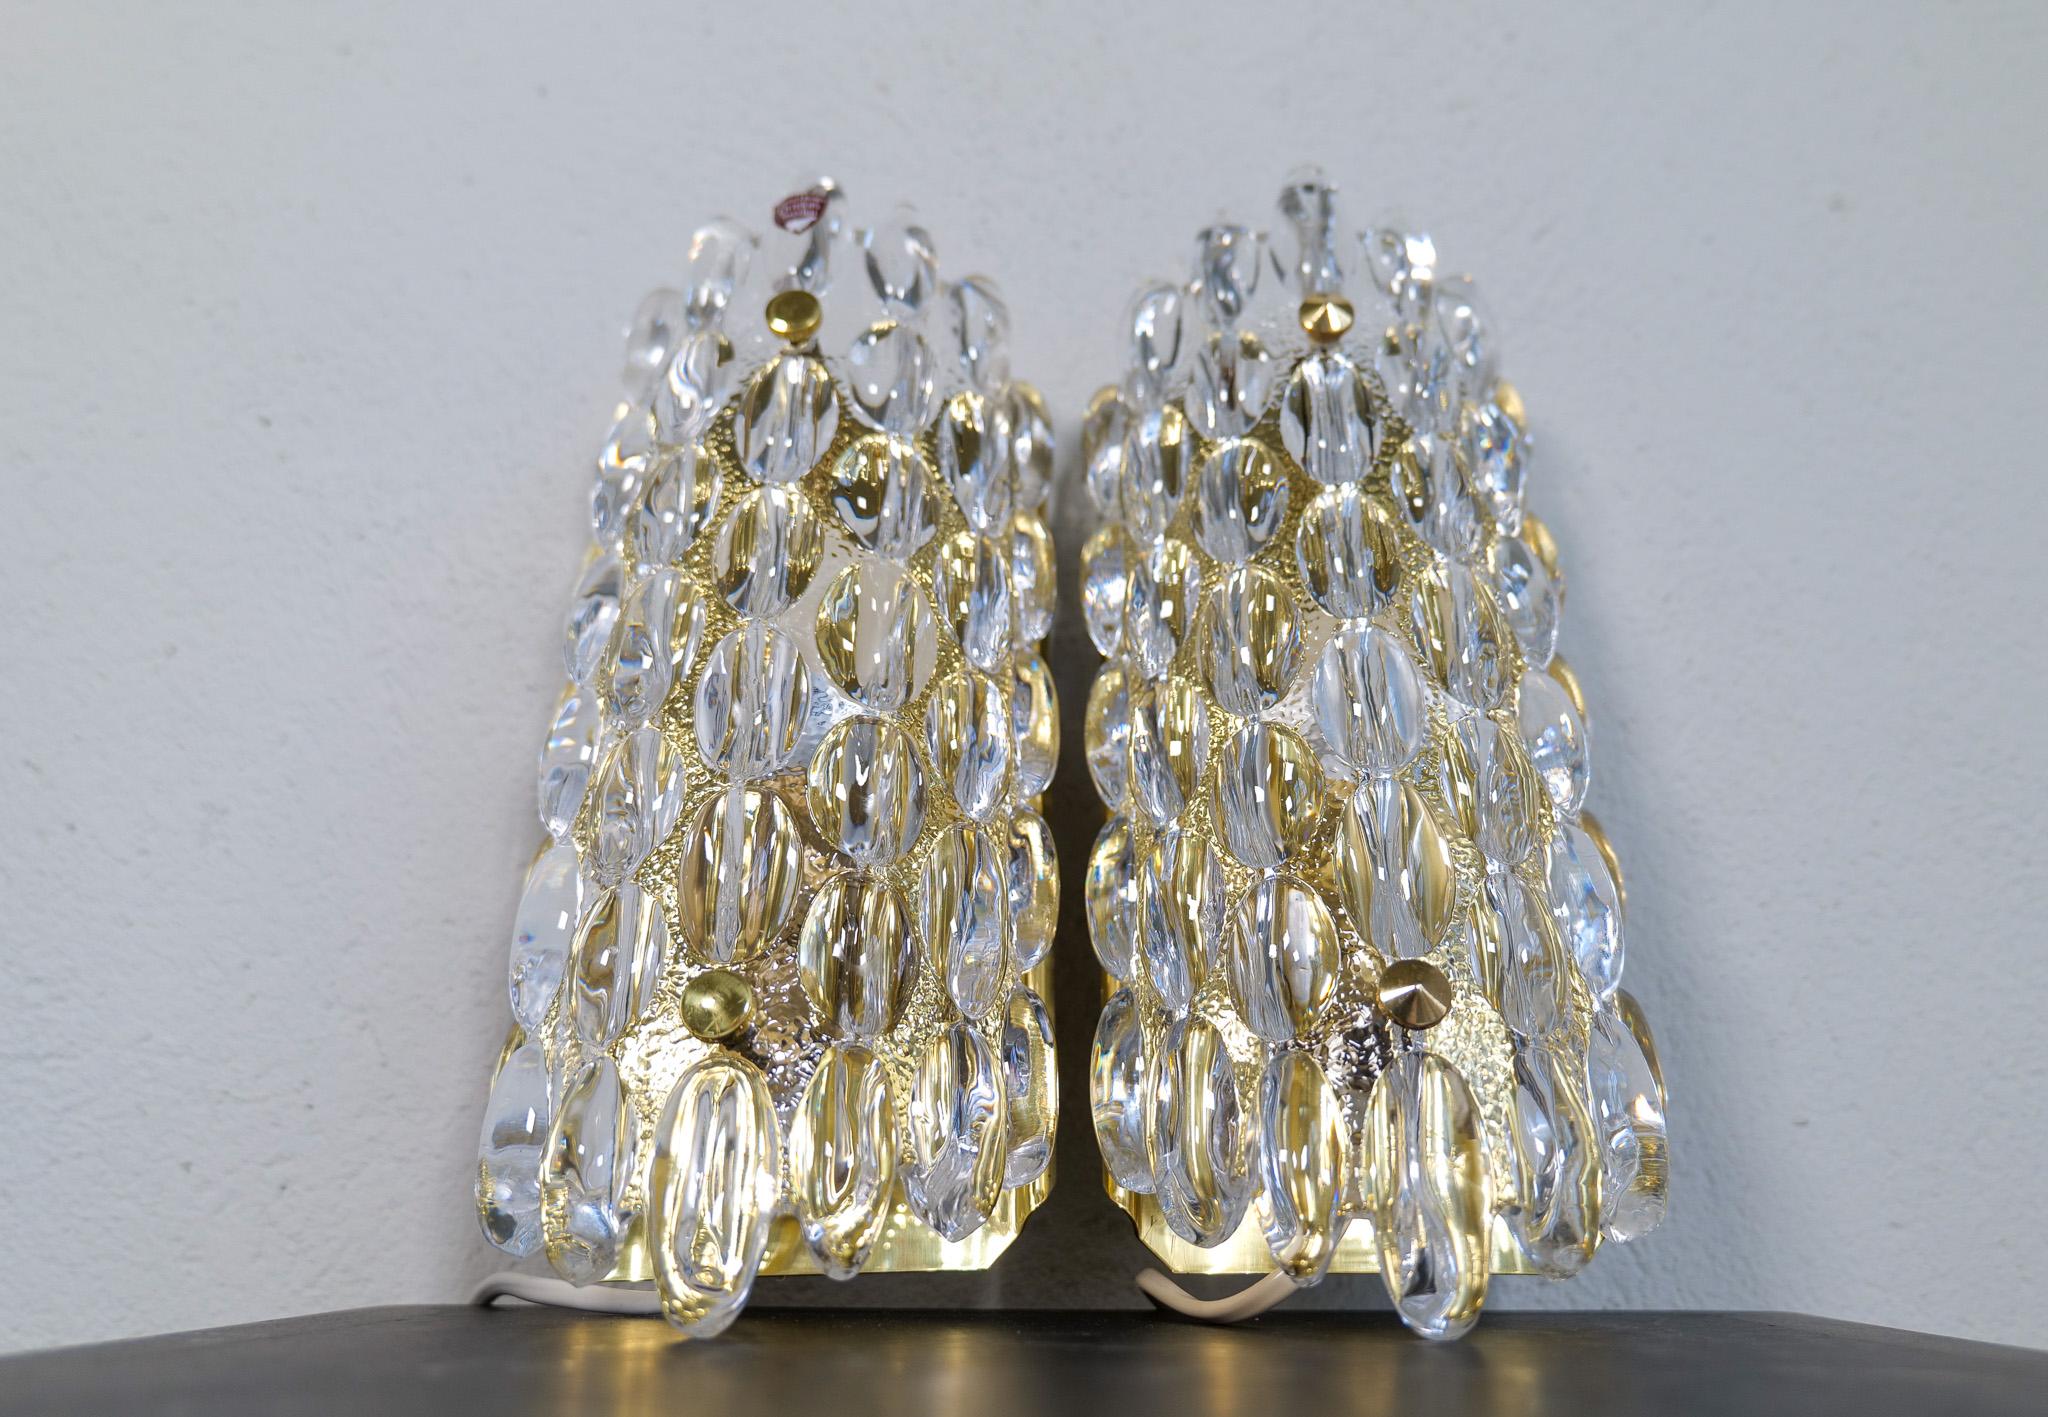 Midcentury Modern Drop Shaped Crystal Wall Lamps Orrefors by Carl Fagerlund In Good Condition For Sale In Hillringsberg, SE